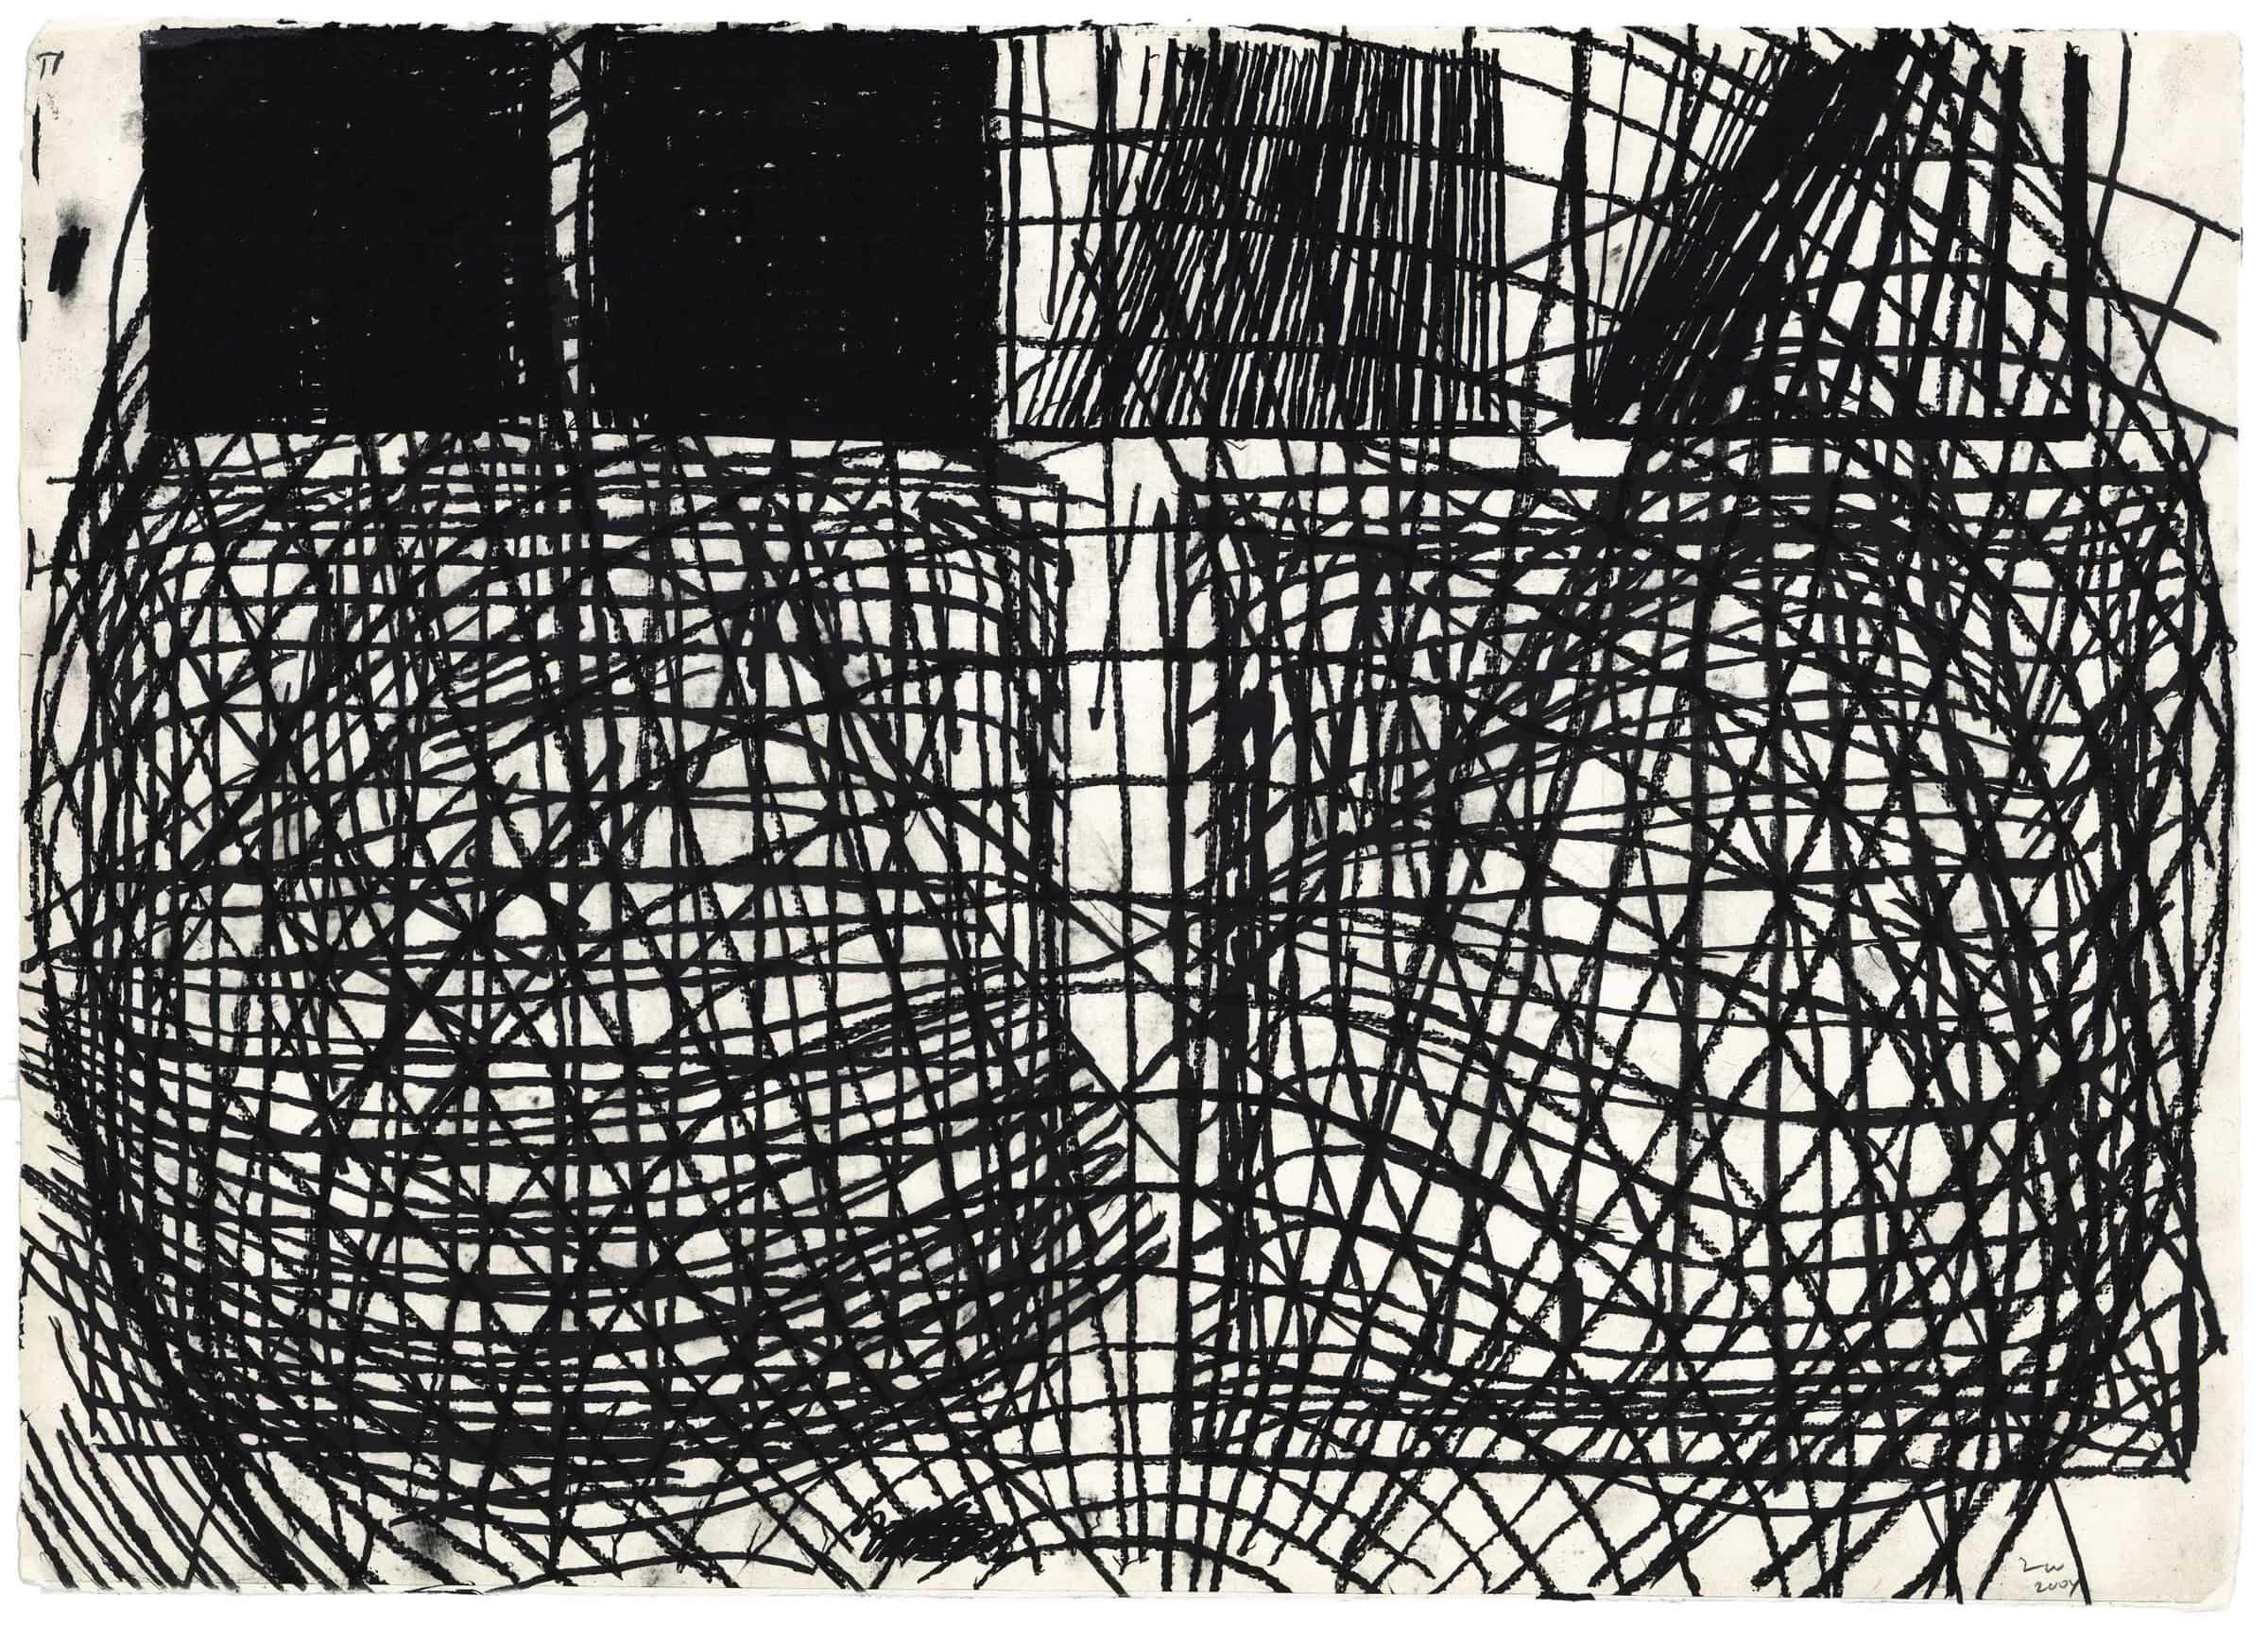 Terry Winters, Grid, 2004